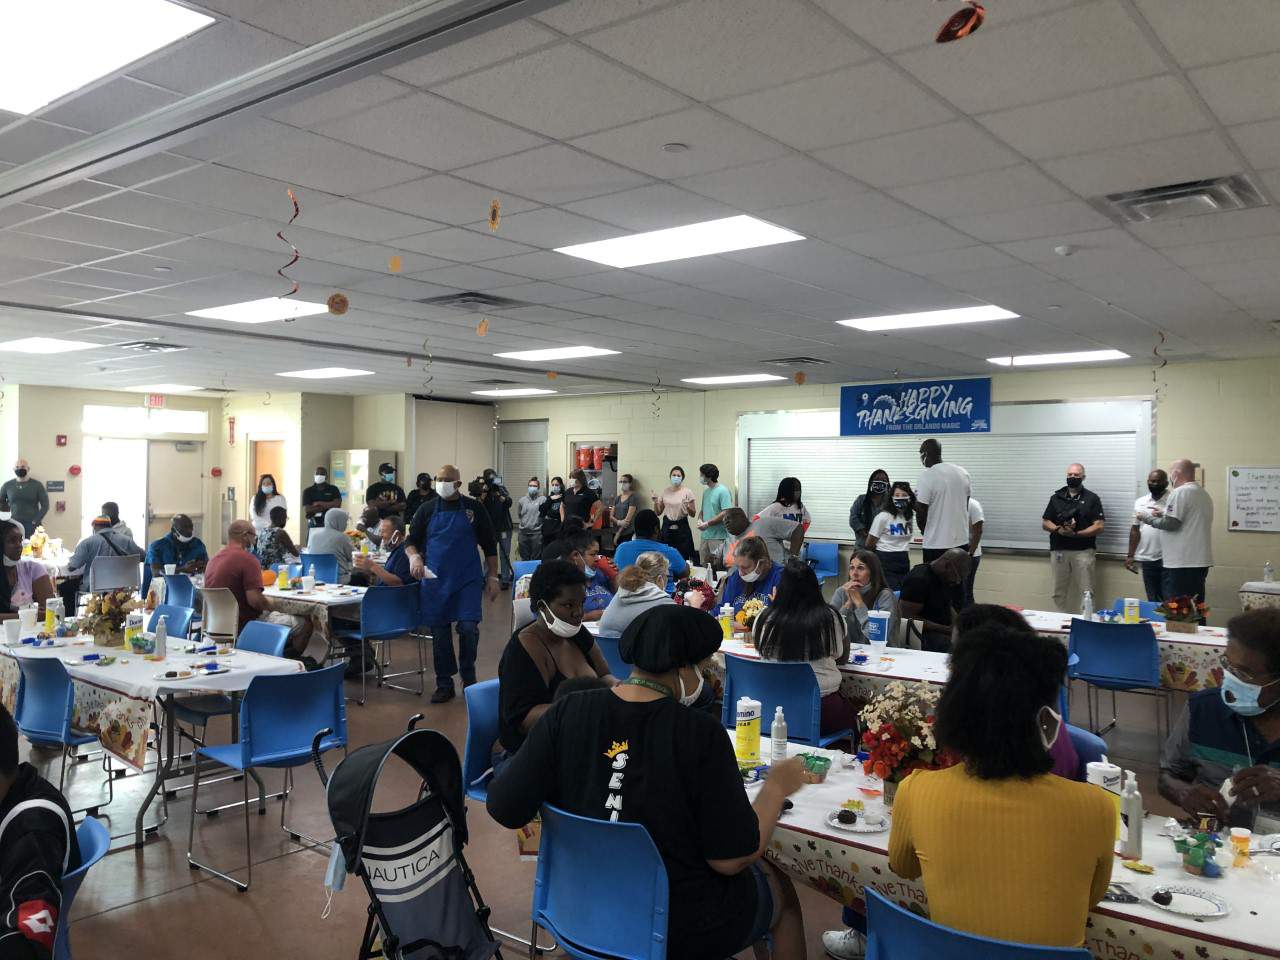 Orlando Magic host annual Thanksgiving event at the Coalition for the Homeless during the COVID-19 pandemic.